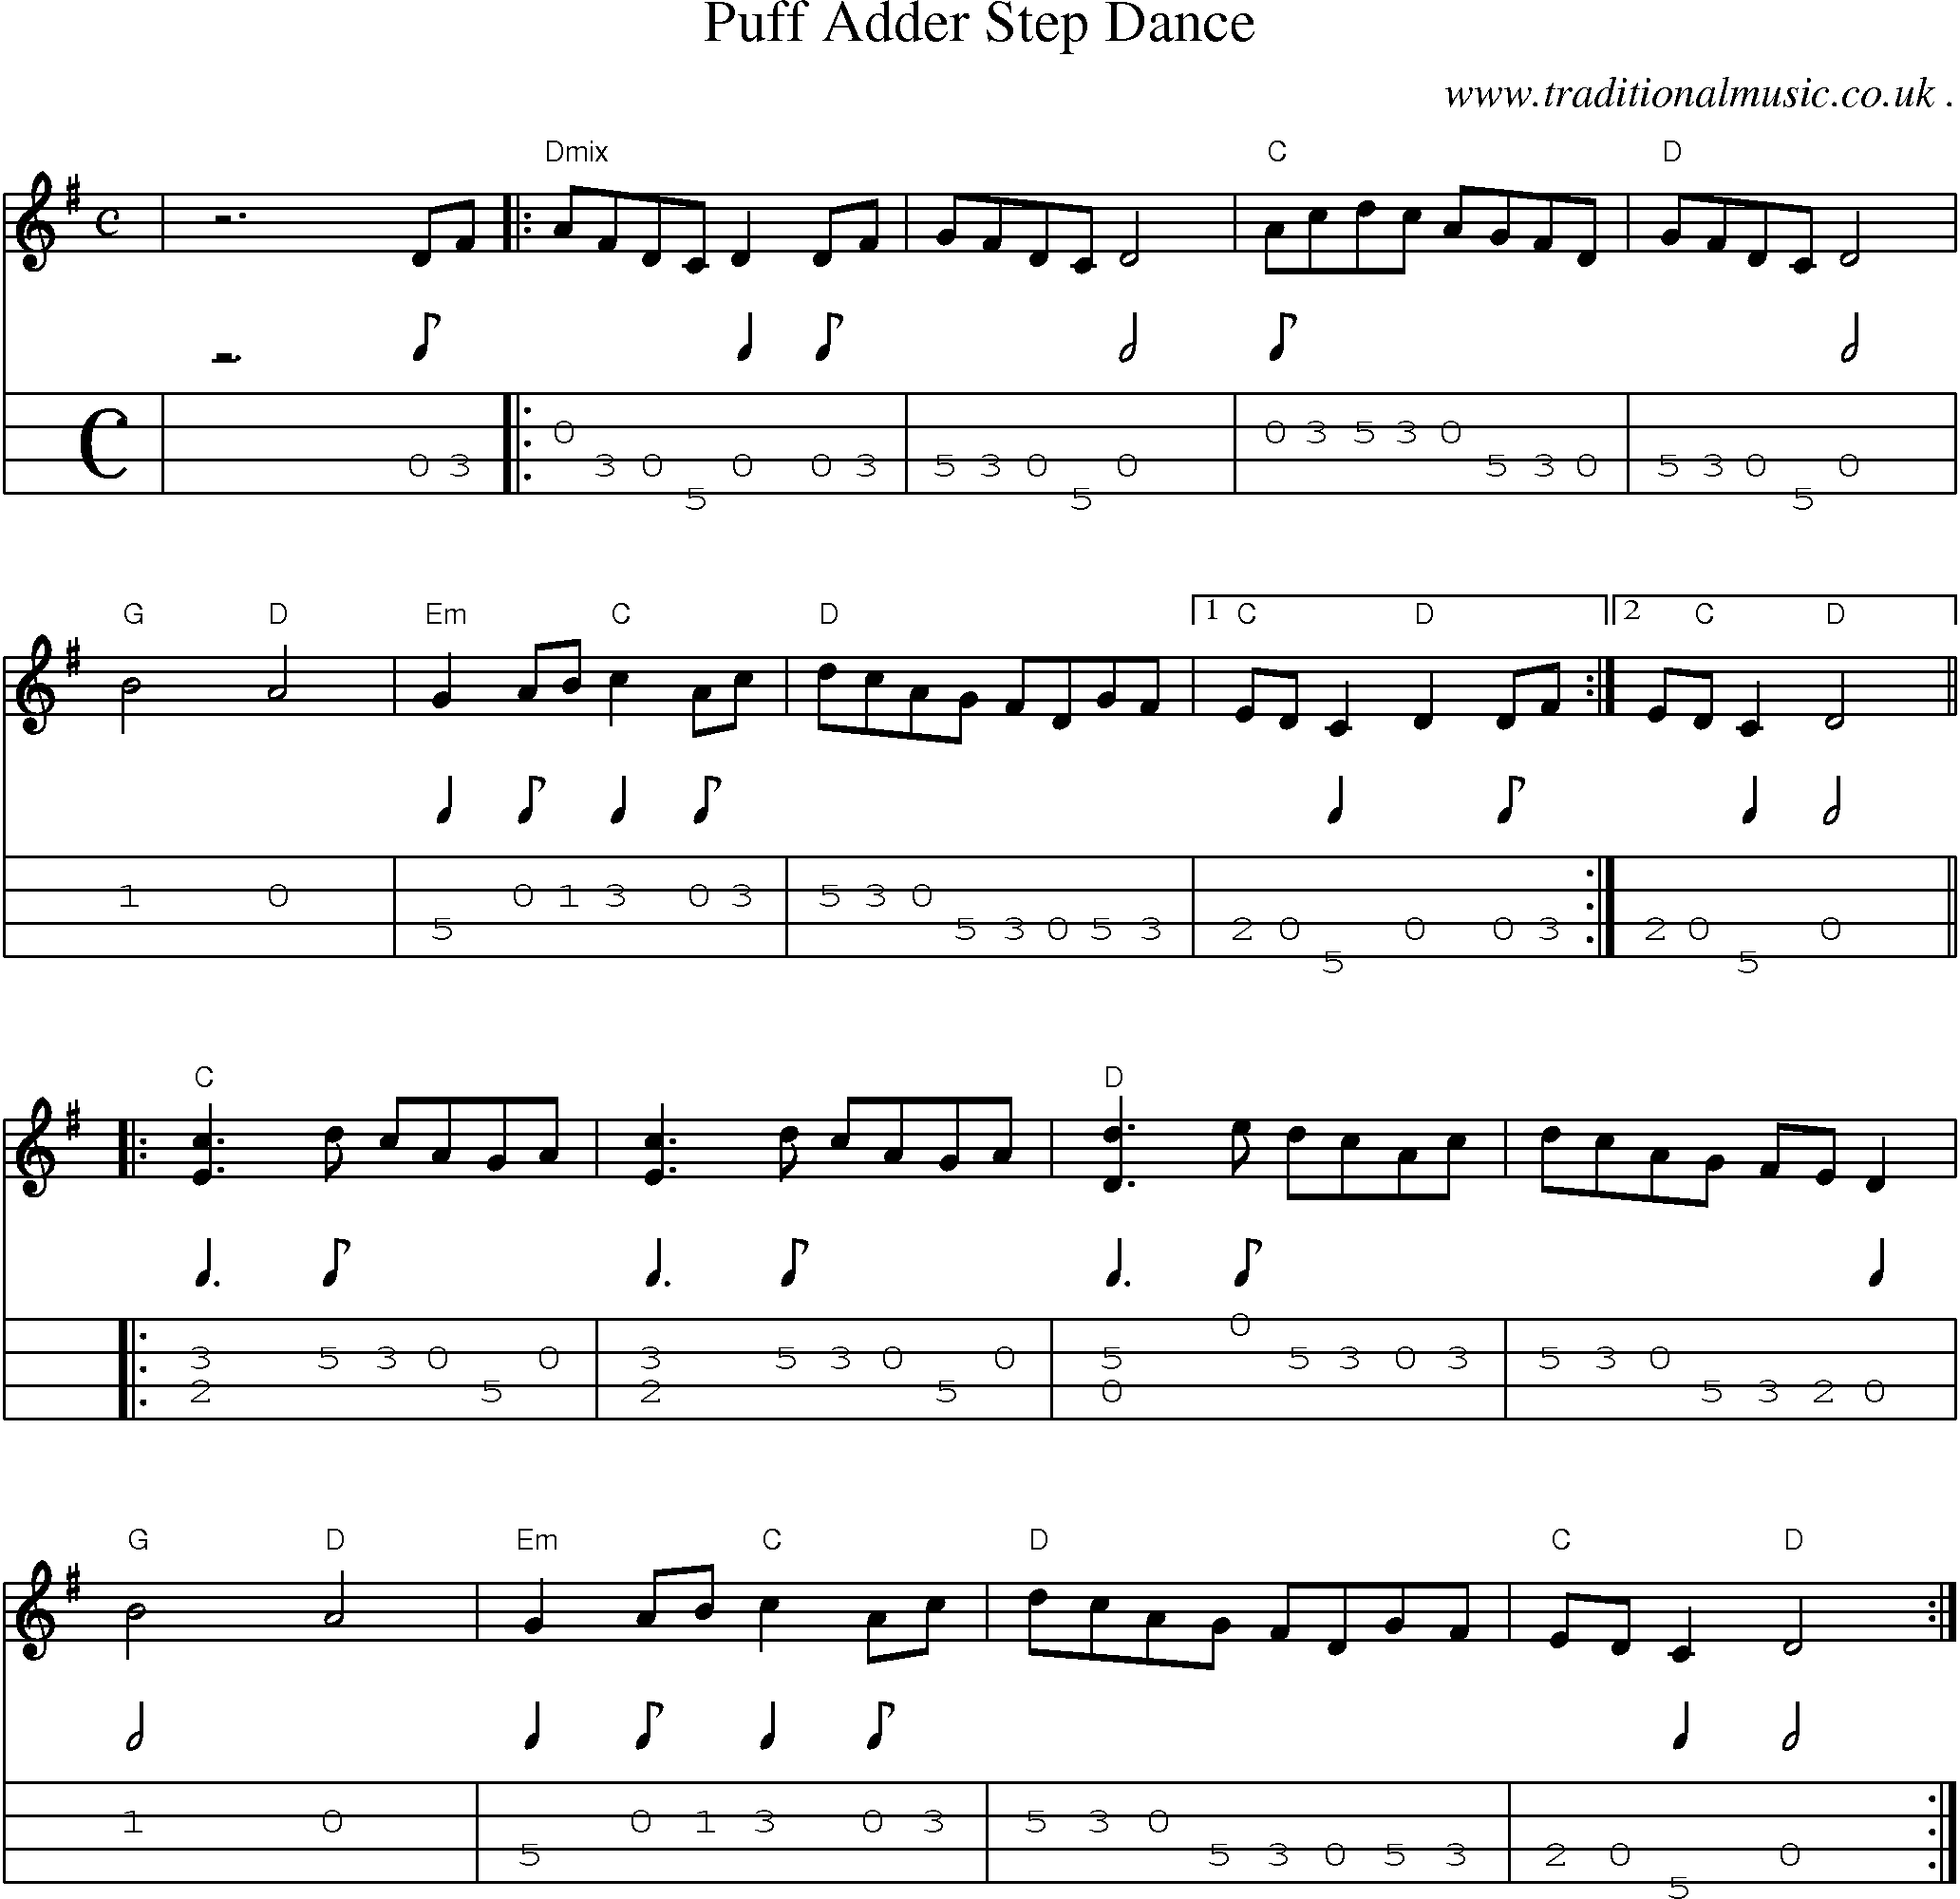 Music Score and Mandolin Tabs for Puff Adder Step Dance